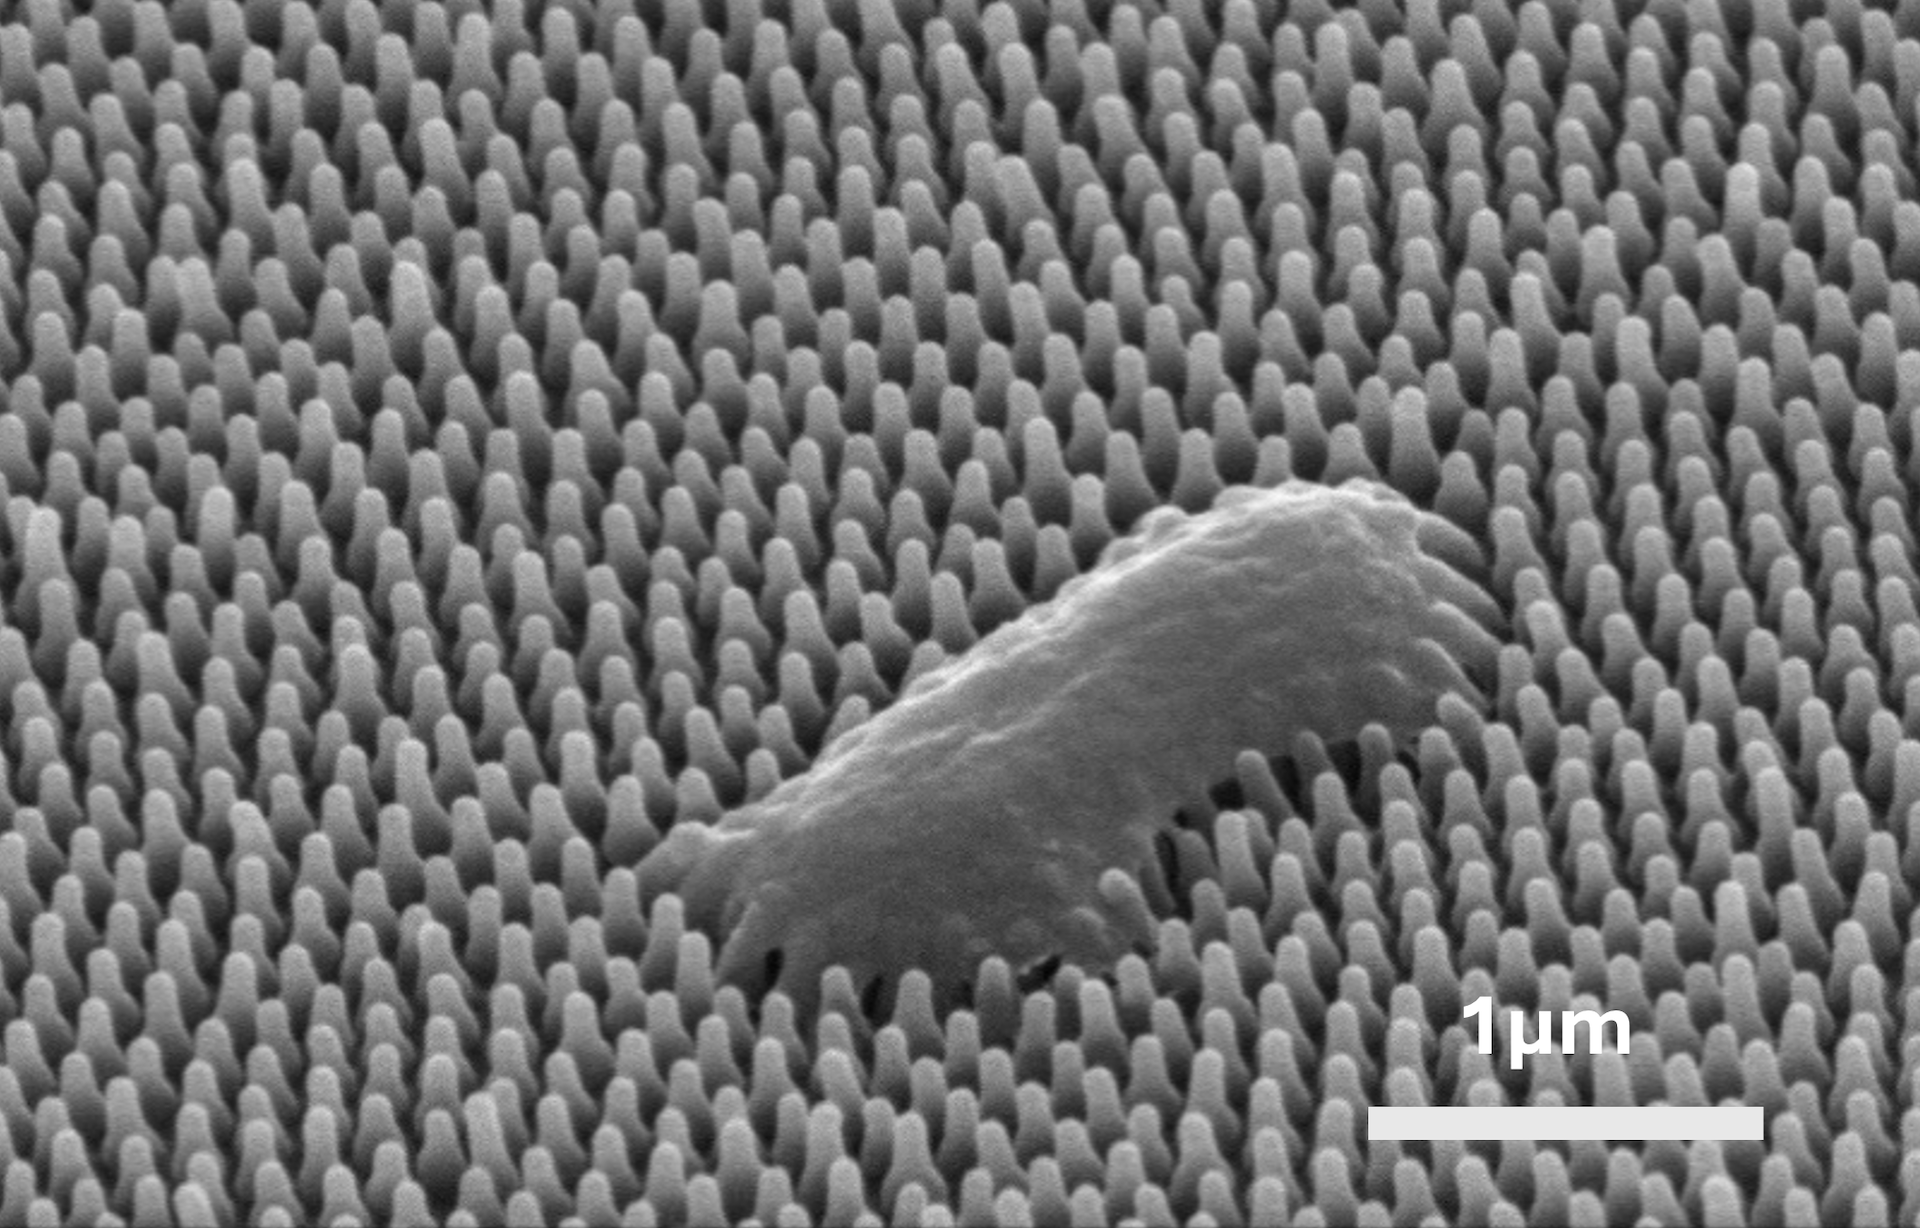 A scanning electron microscope title view of a Pseudomonas bacteria punctured on a cicada wing.